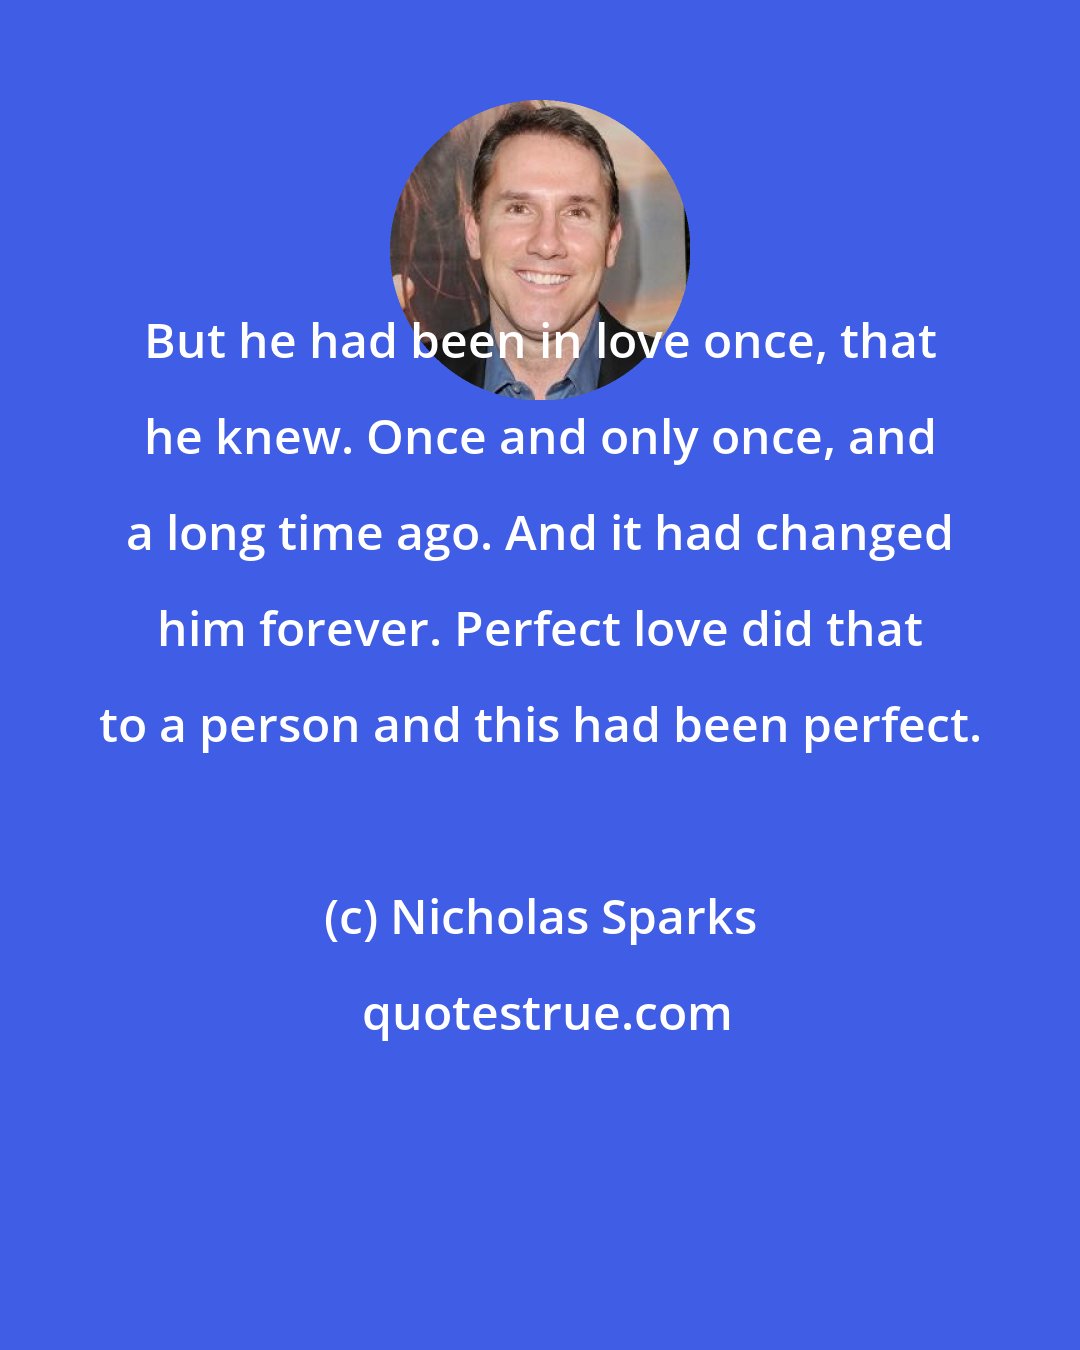 Nicholas Sparks: But he had been in love once, that he knew. Once and only once, and a long time ago. And it had changed him forever. Perfect love did that to a person and this had been perfect.